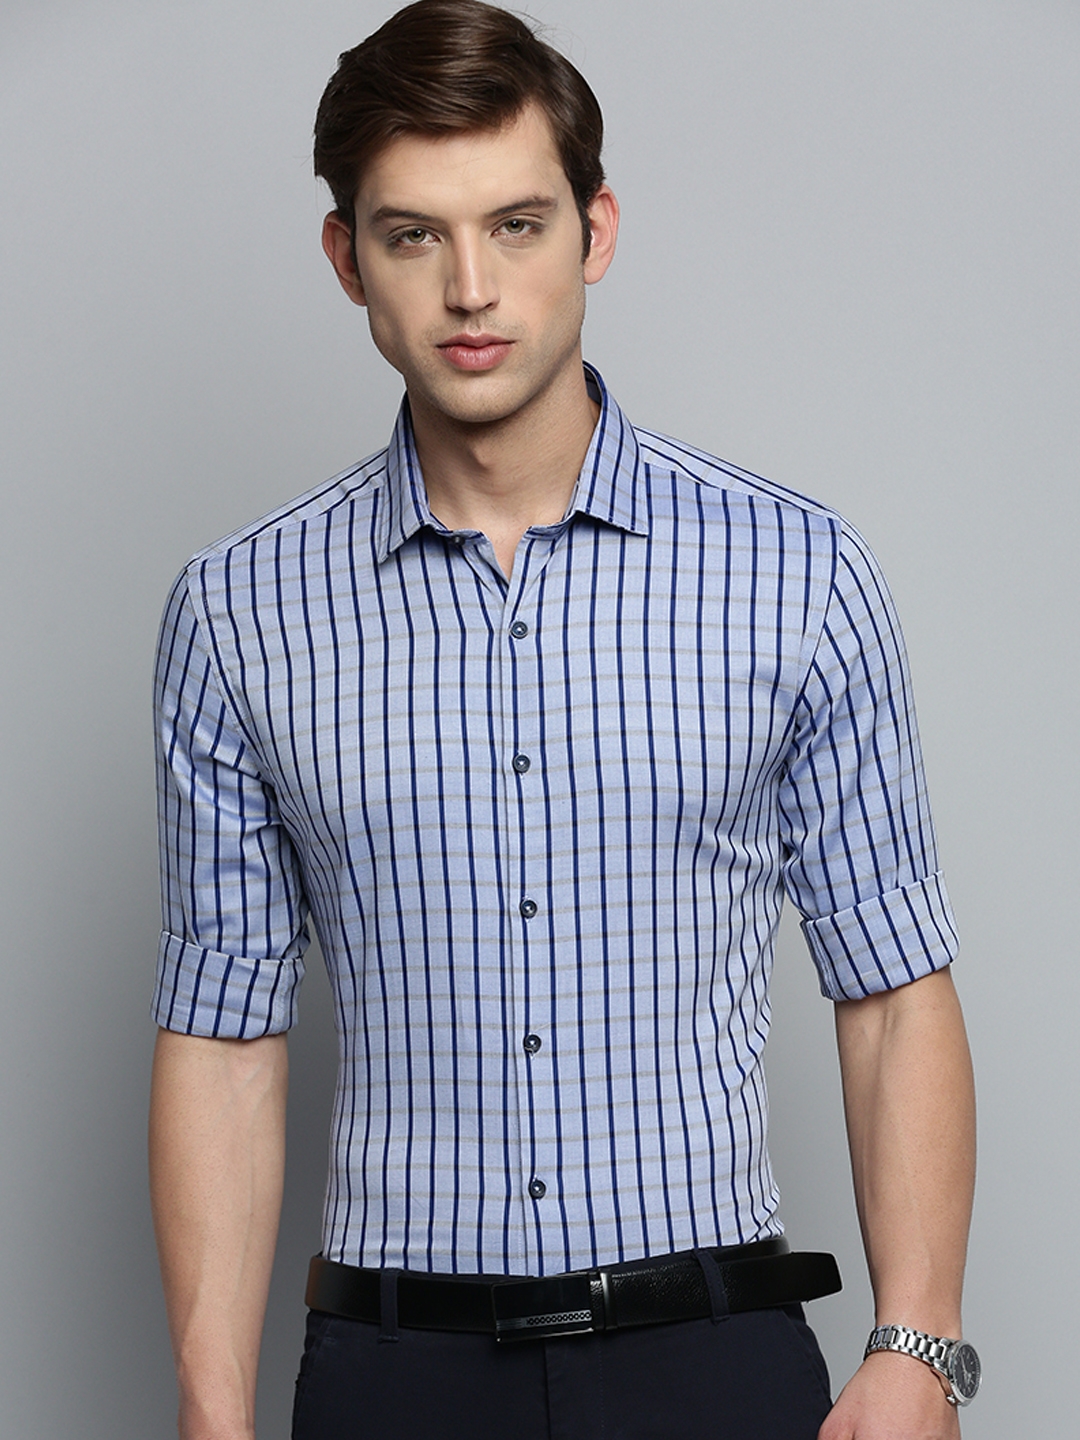 Showoff | SHOWOFF Men's Spread Collar Checked Blue Classic Shirt 1